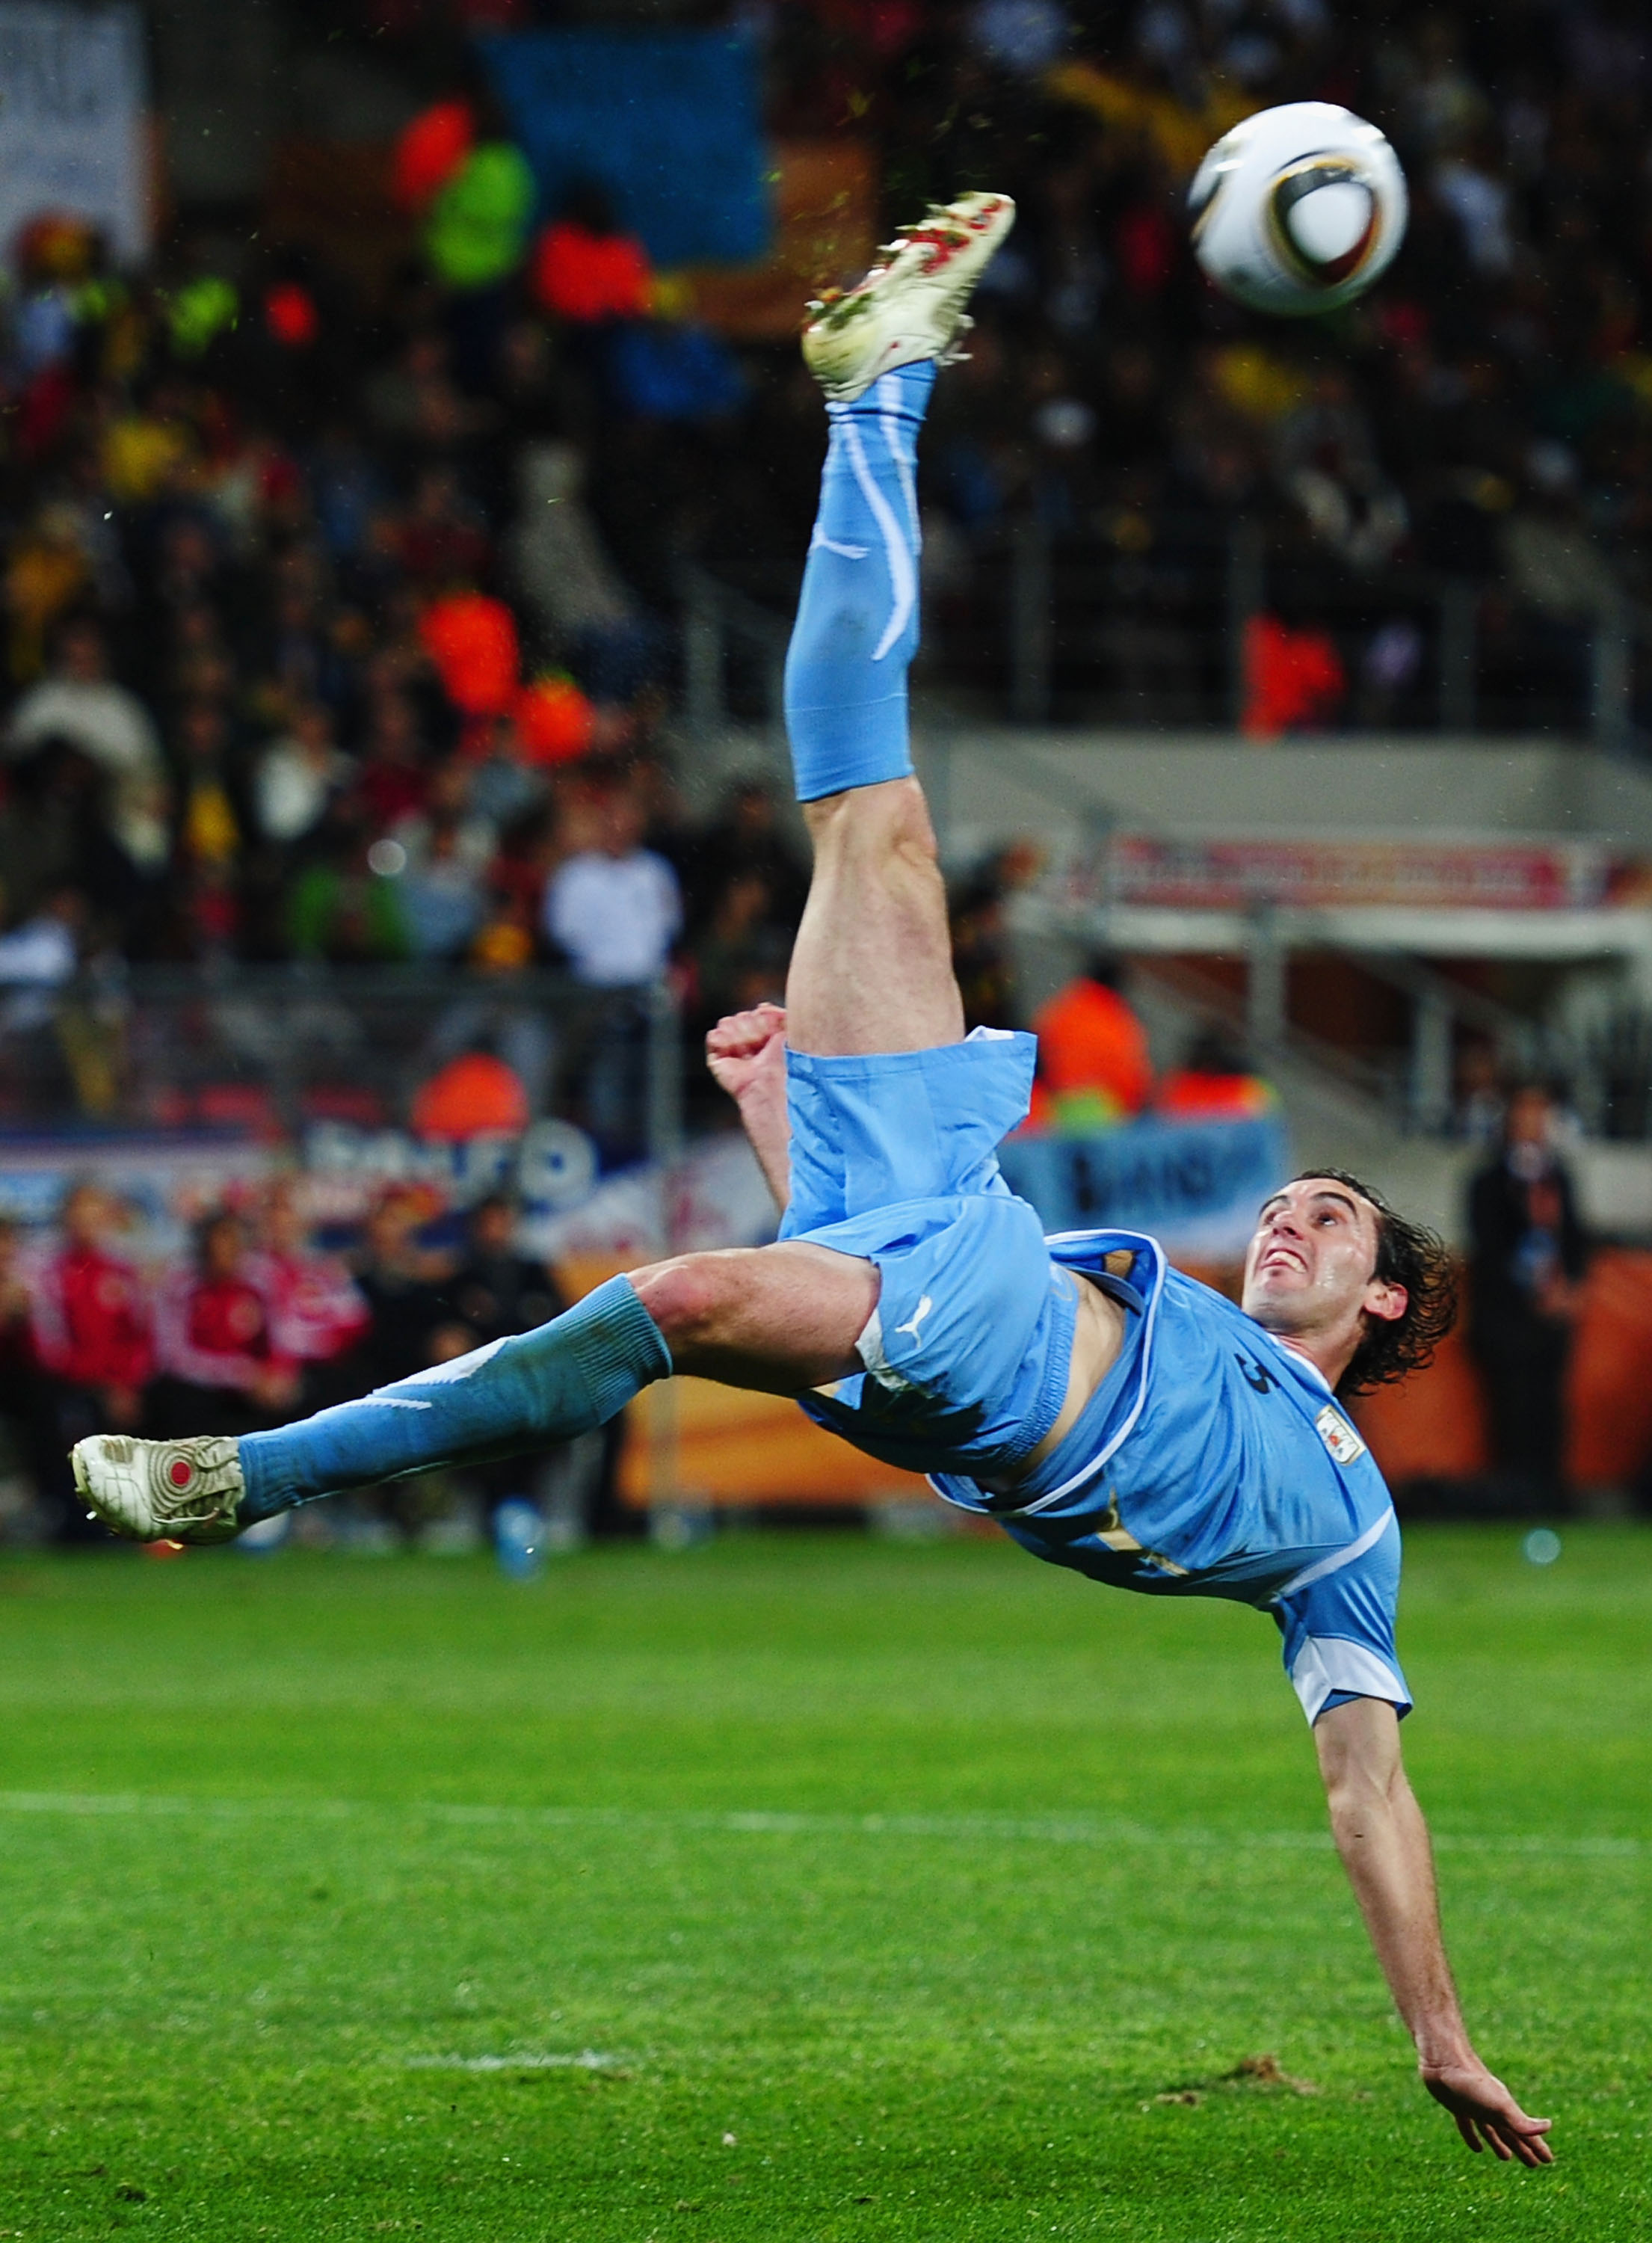 PORT ELIZABETH, SOUTH AFRICA - JULY 10: Diego Godin of Uruguay in action during the 2010 FIFA World Cup South Africa Third Place Play-off match between Uruguay and Germany at The Nelson Mandela Bay Stadium on July 10, 2010 in Port Elizabeth, South Africa.